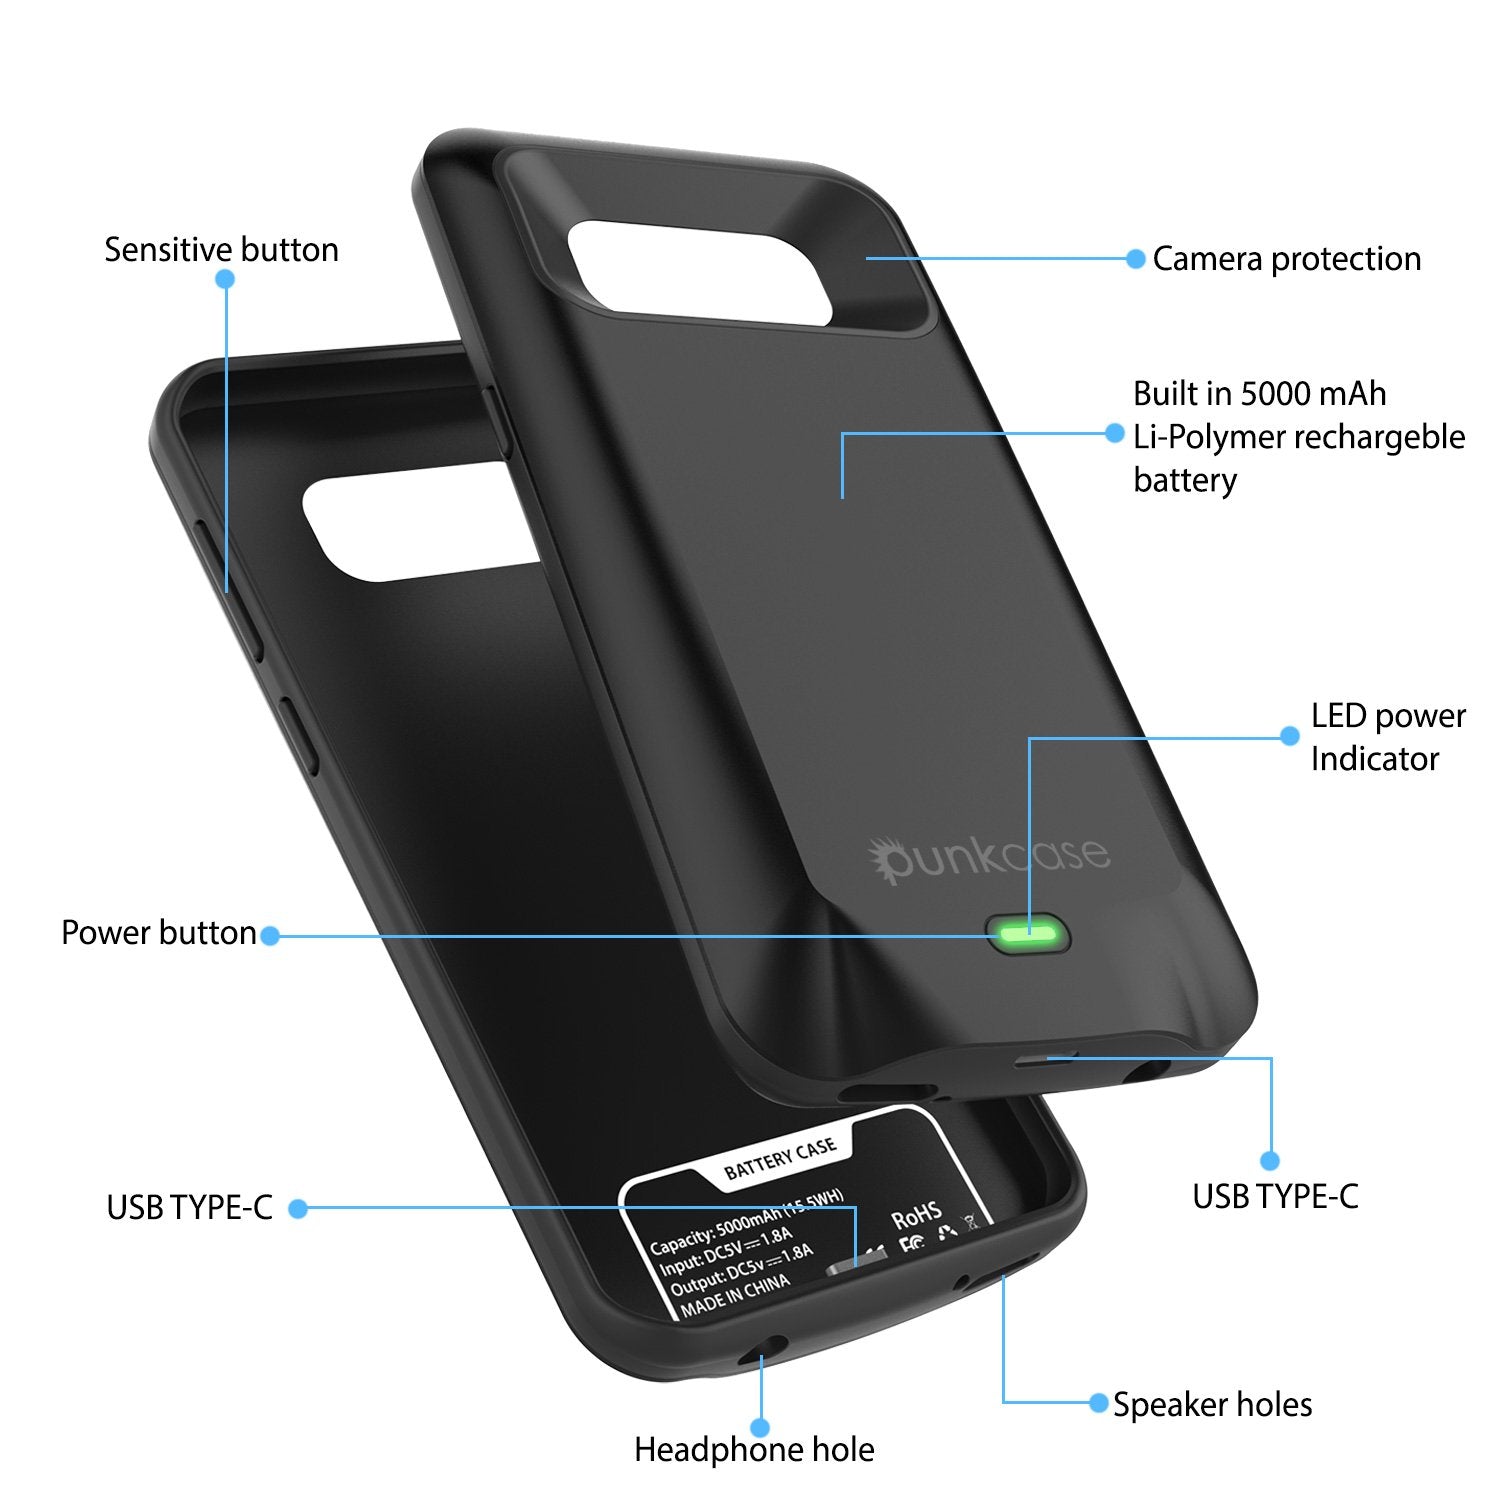 Galaxy S8 Battery Case, Punkcase 5000mAH Charger Case W/ Screen Protector | Integrated Kickstand & USB Port | IntelSwitch [Black]